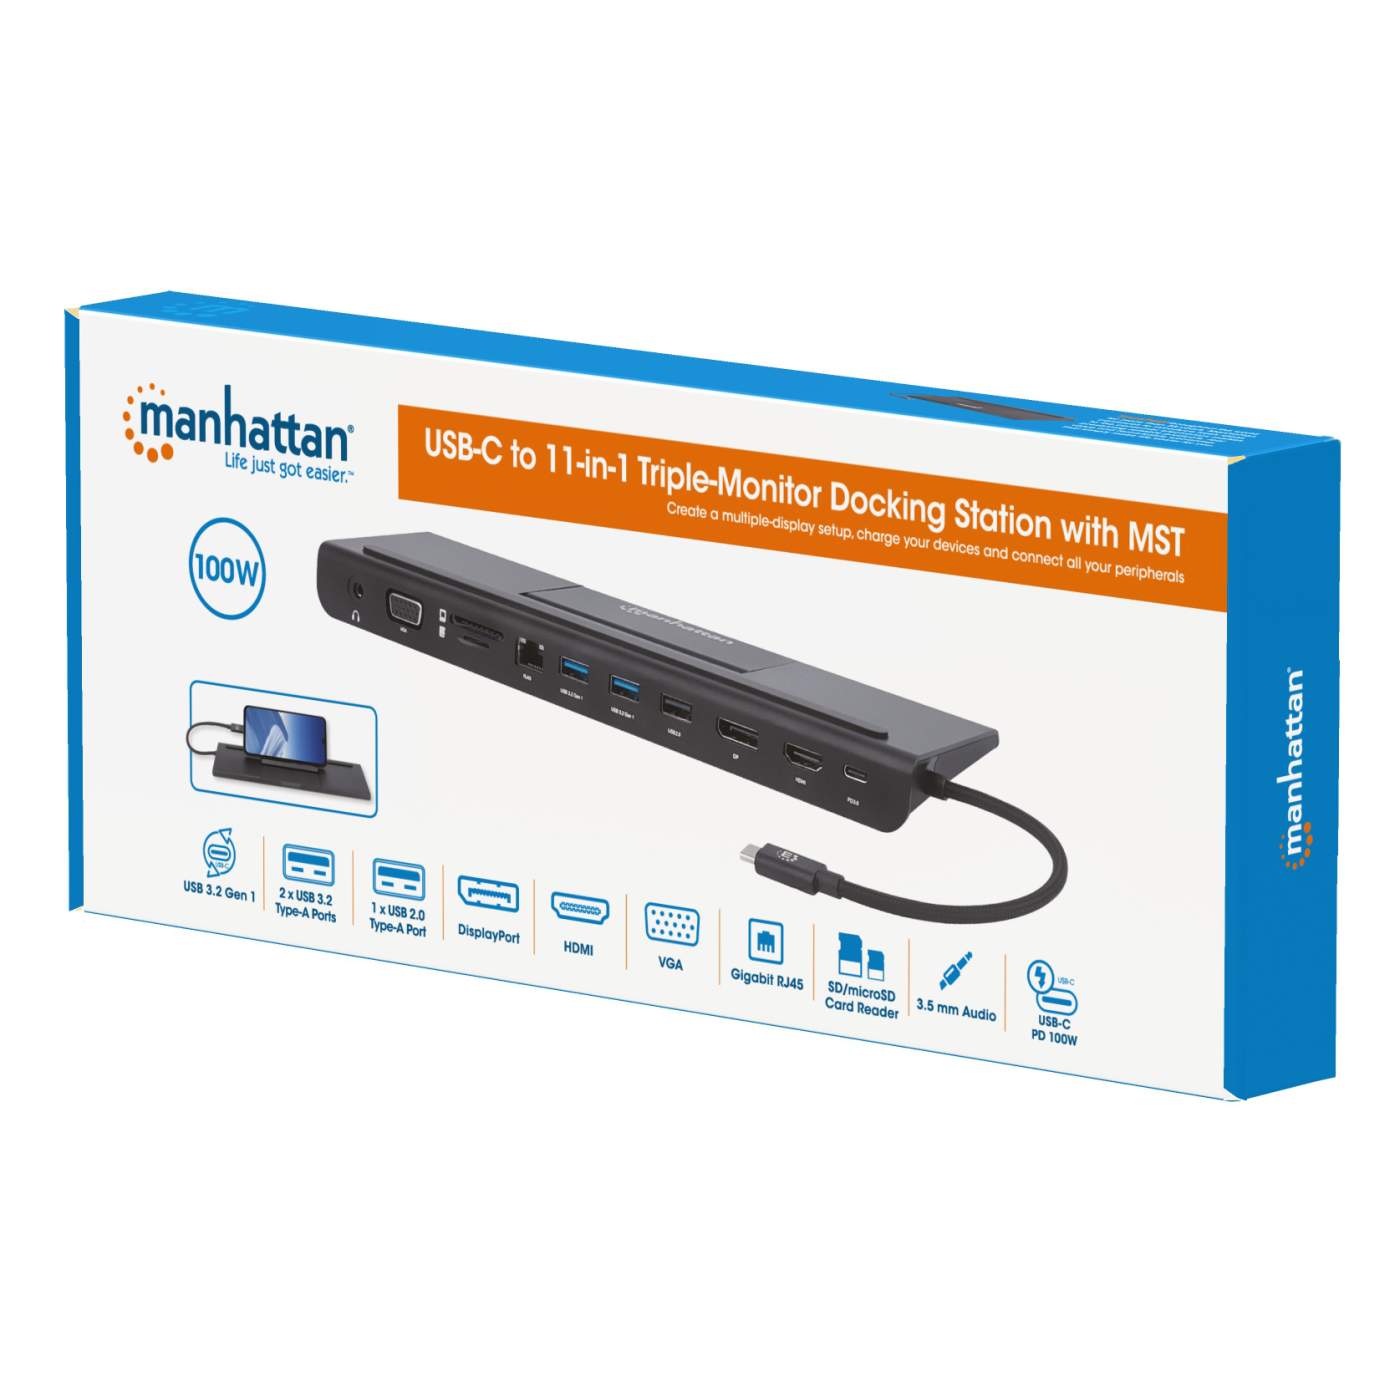 USB-C 11-in-1 Triple-Monitor Docking Station with MST Packaging Image 2